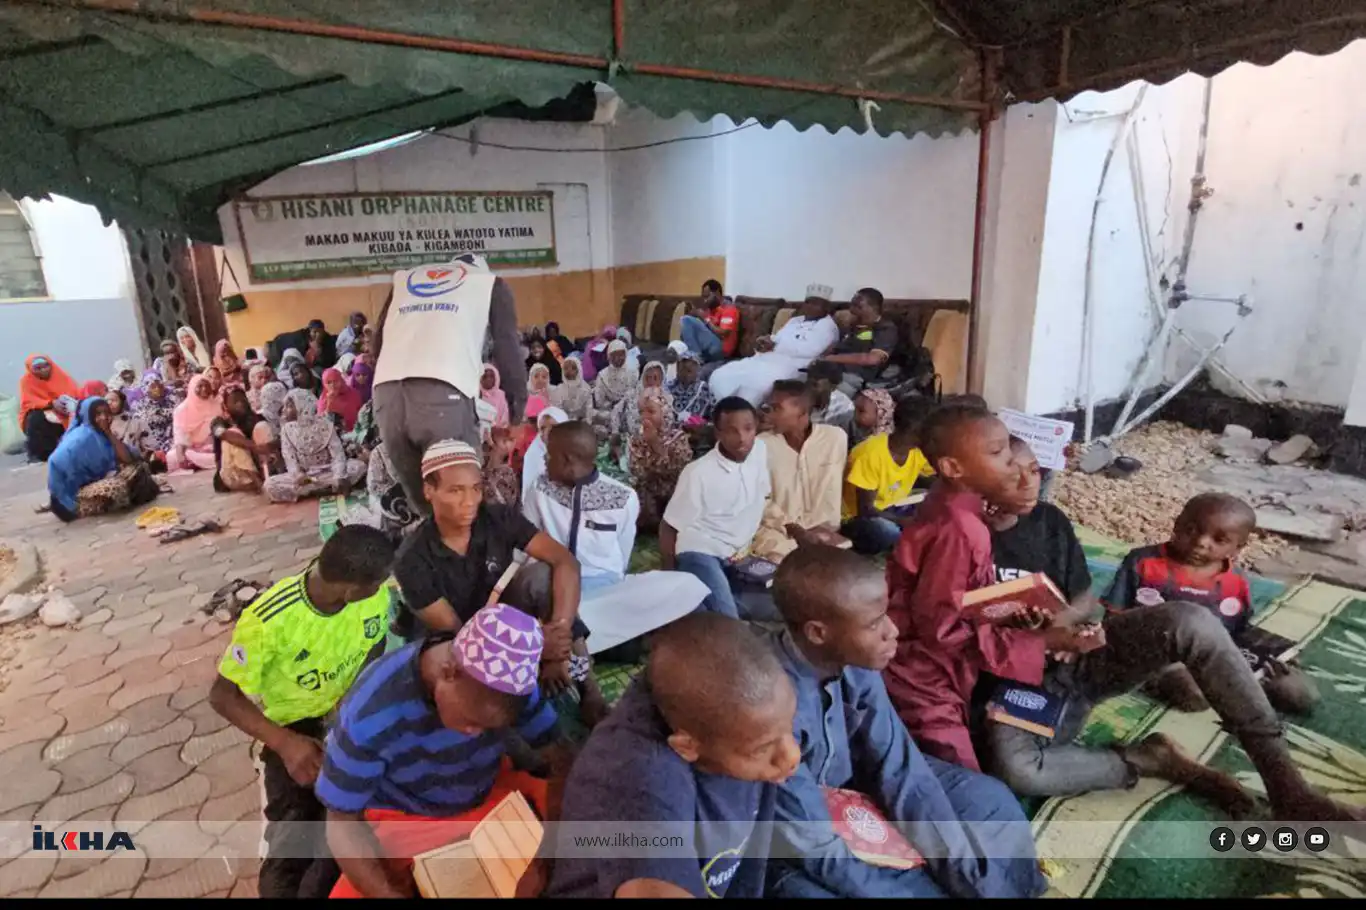 Orphans Foundation delivers aid to families in Tanzania for Eid al-Adha